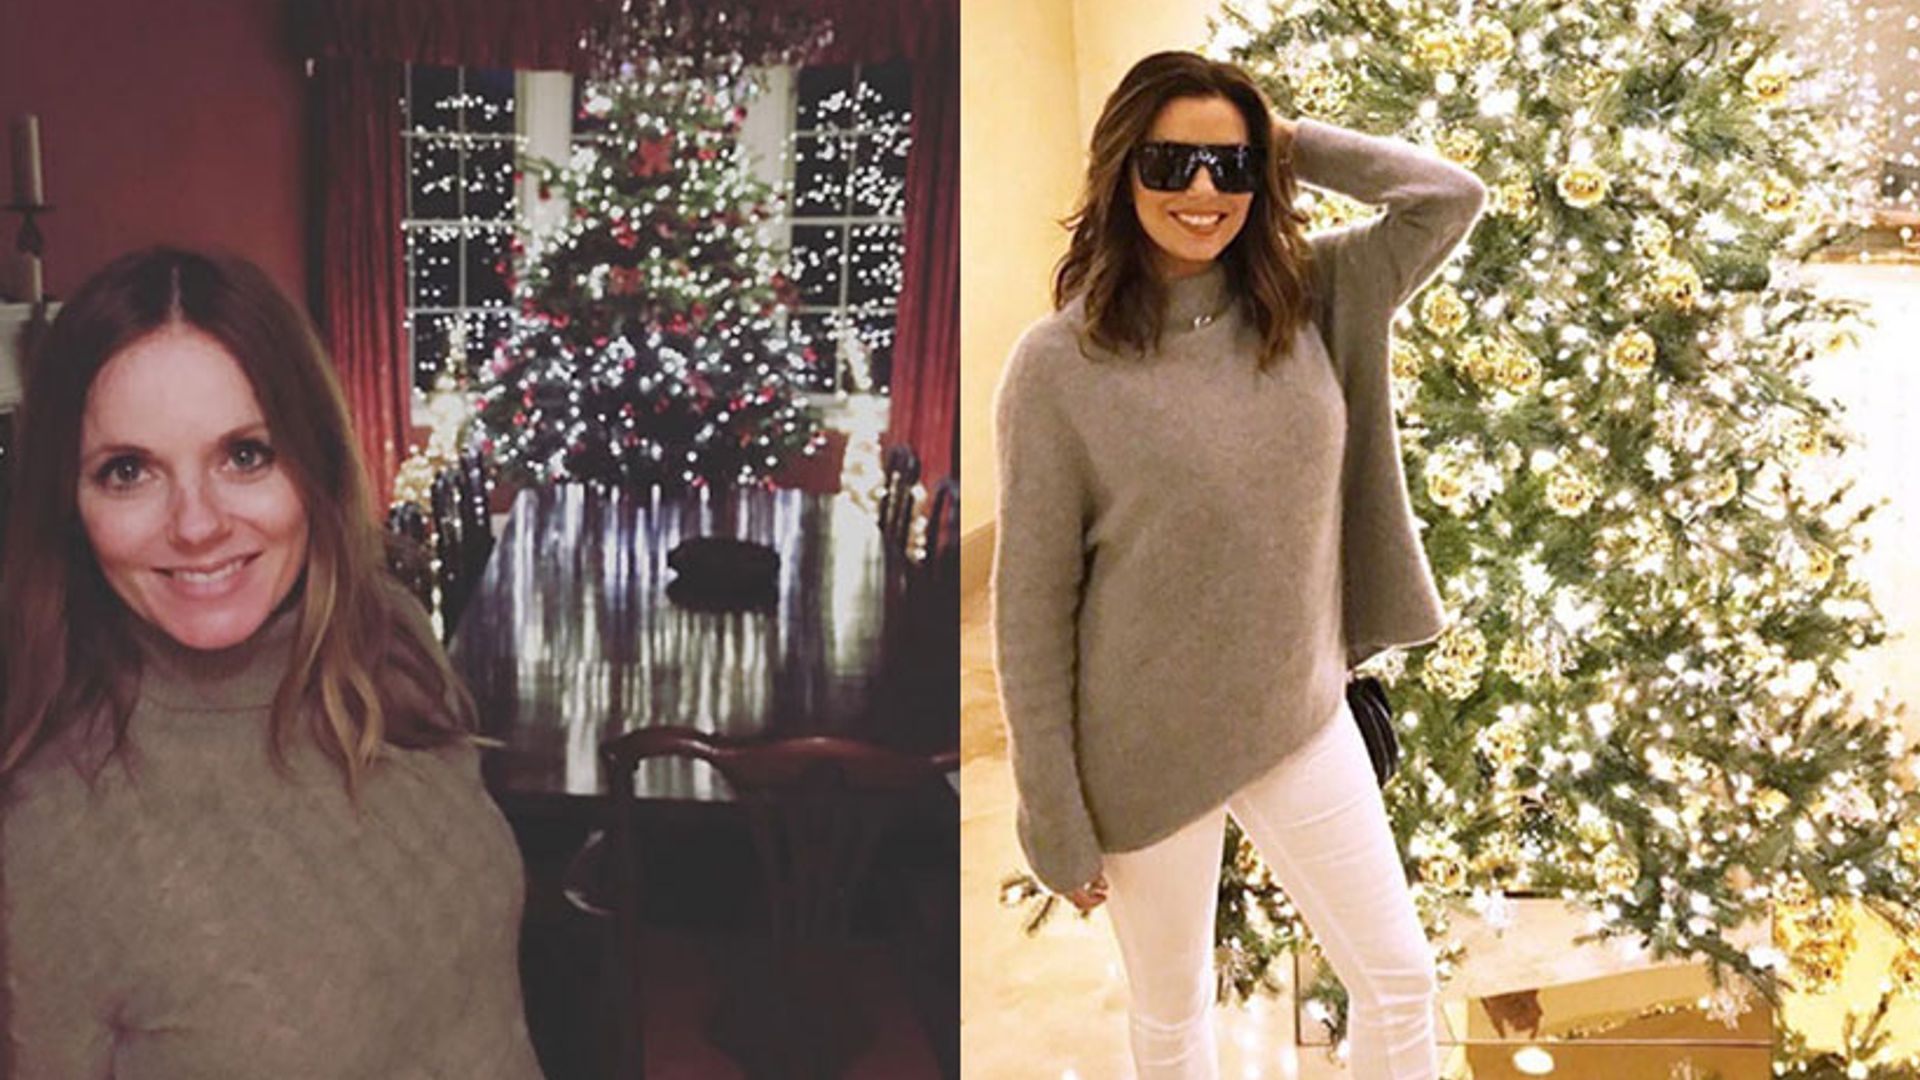 Celebrities get into the festive spirit and share photos of their amazing Christmas trees